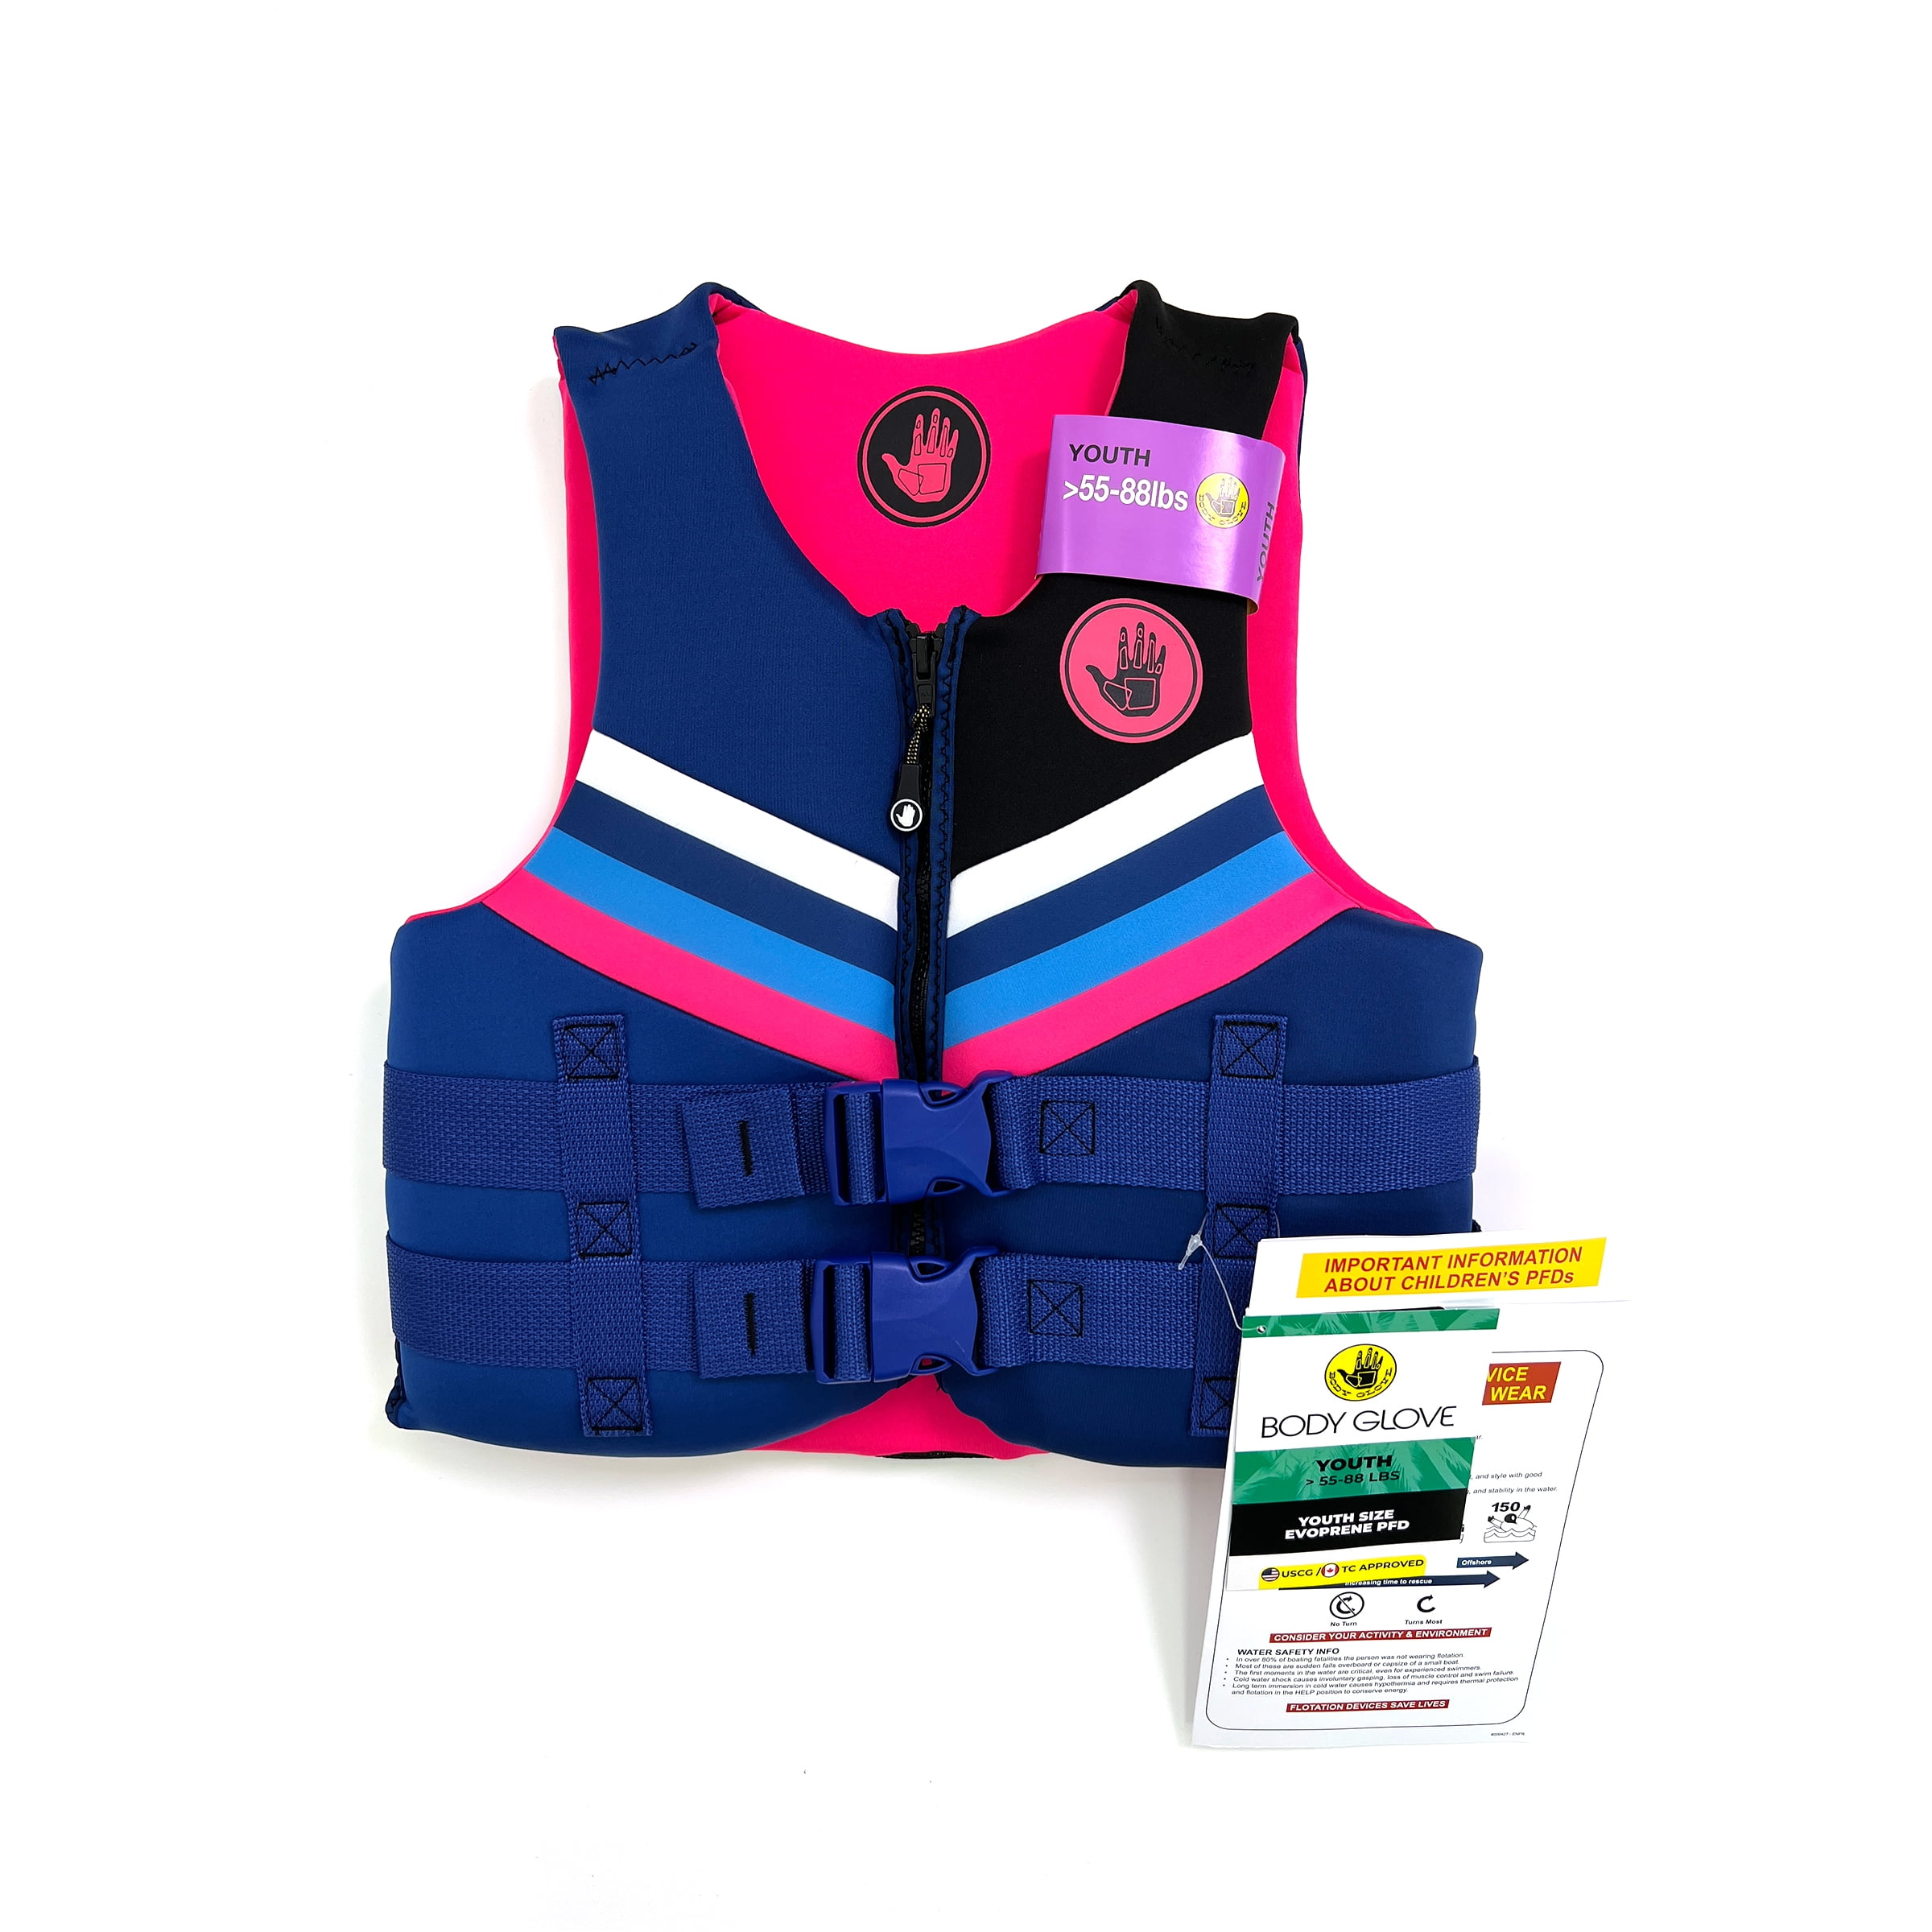 Body Glove Youth Girls Life Vest 50-90lbs Pink/purple for sale online 